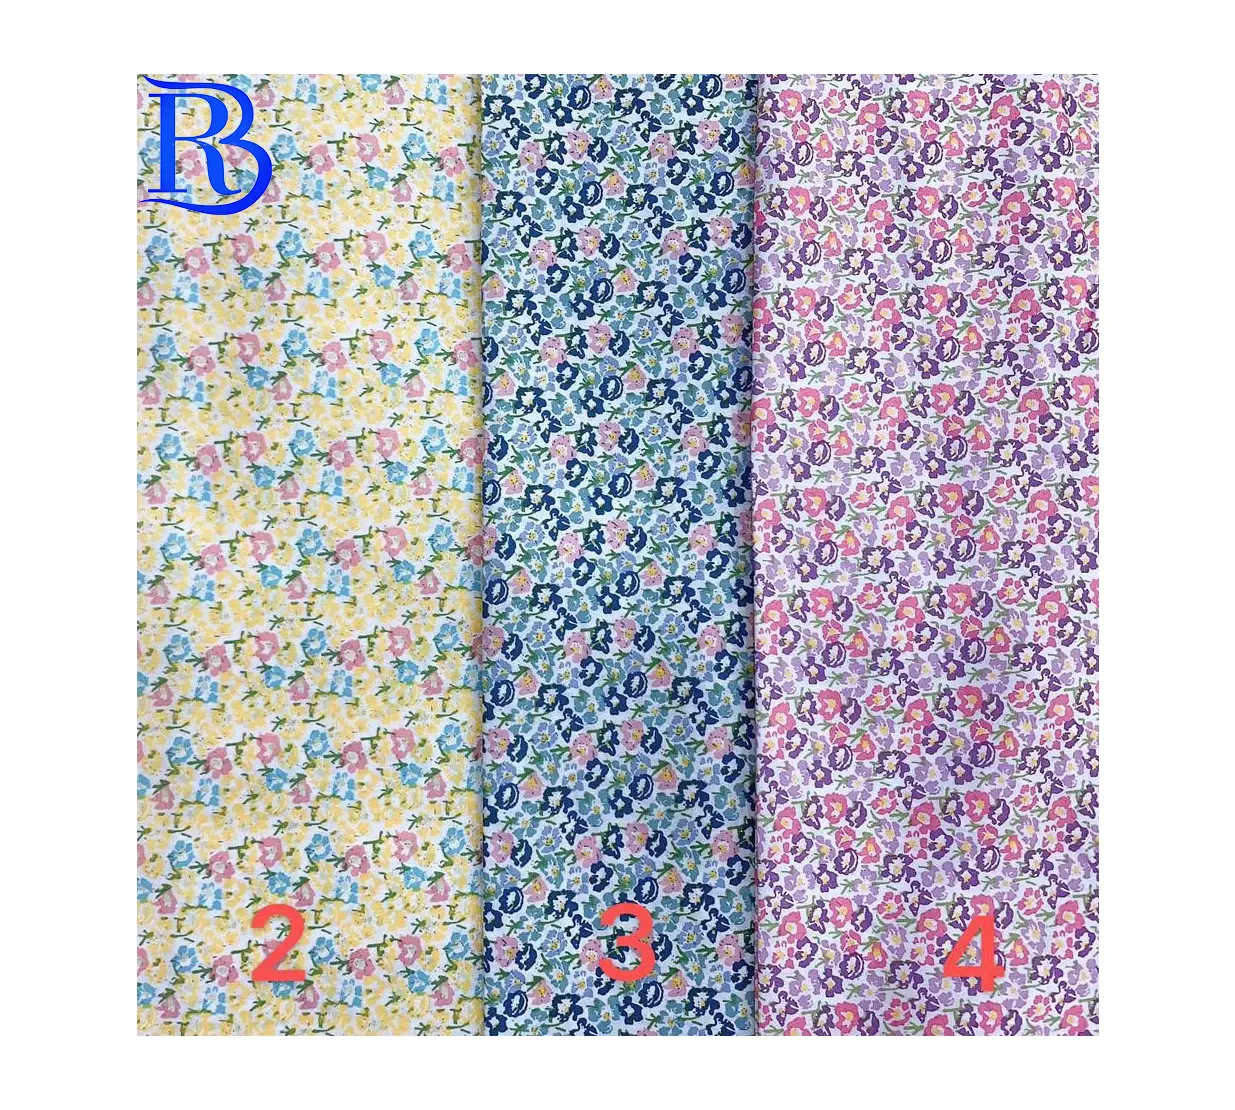 Shaoxing textiles factory wholesale 100% woven cotton custom floral printed poplin fabric for shirt